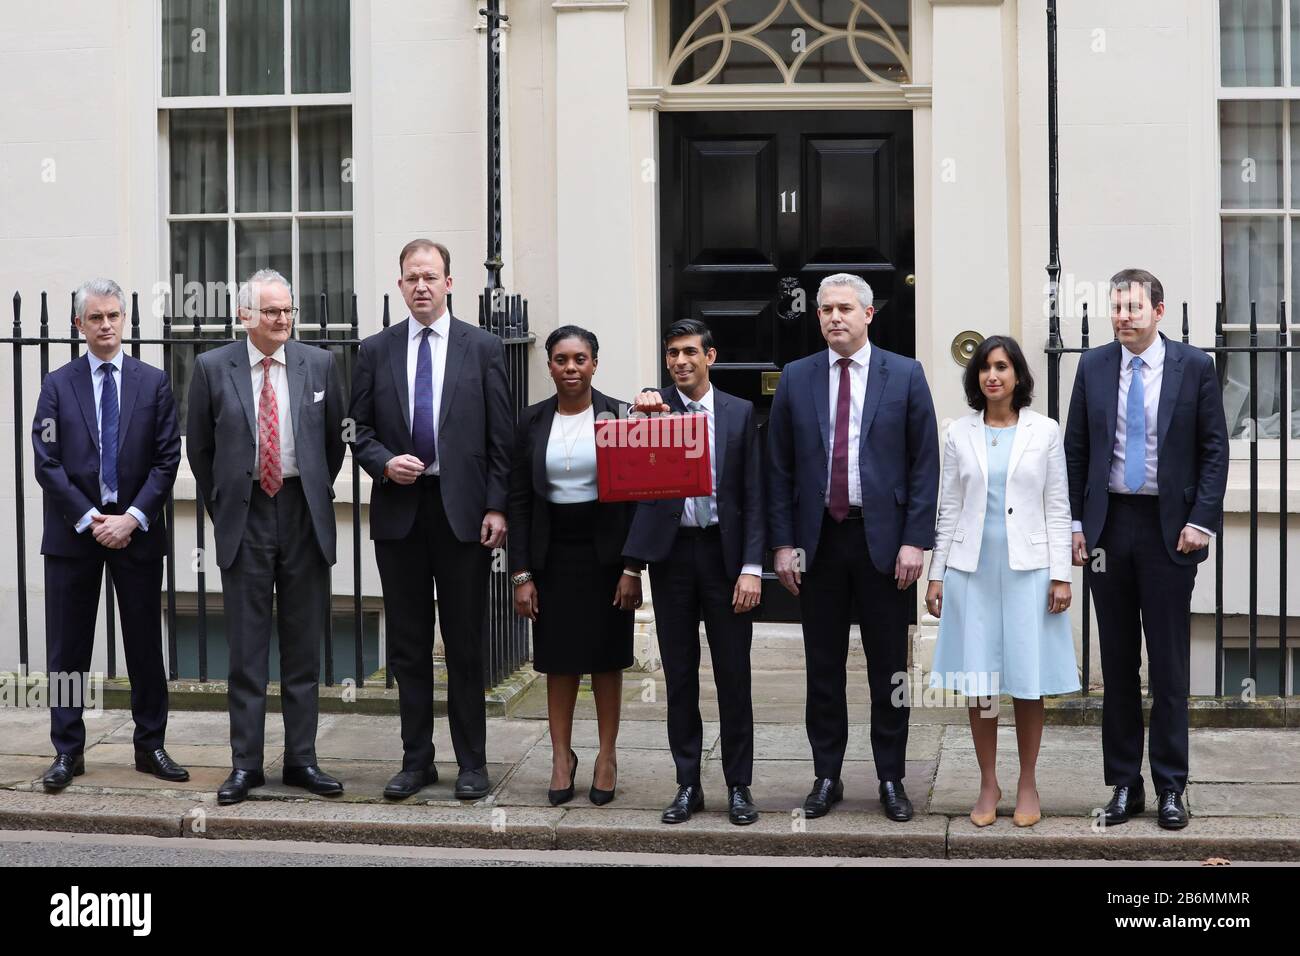 London, London, UK. 11th Mar, 2020. Rishi Sunak (4th R), Britain's Chancellor of the Exchequer, poses for a picture with members of his treasury team as he leaves 11 Downing Street to deliver his budget to Parliament, in London, Britain on March 11, 2020. Credit: Tim Ireland/Xinhua/Alamy Live News Stock Photo